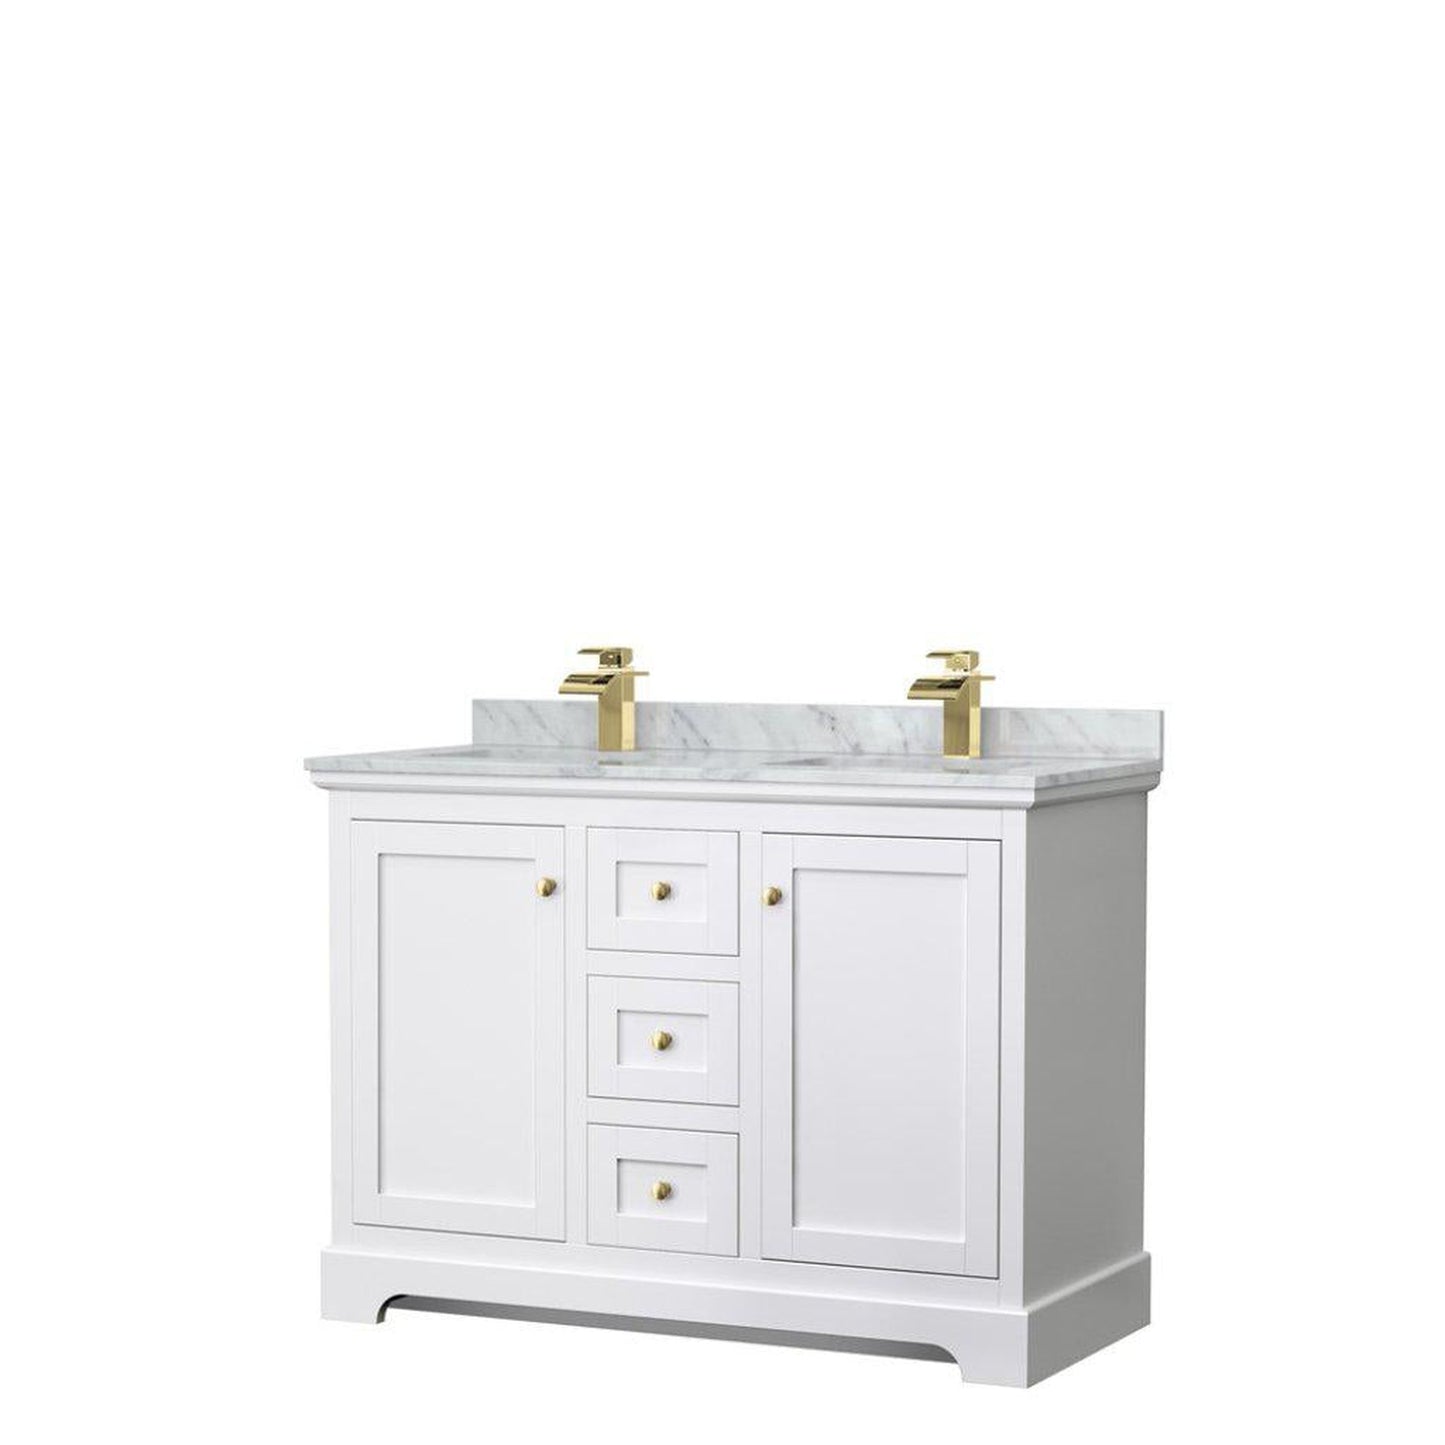 Wyndham Collection Avery 48" White Double Bathroom Vanity, White Carrara Marble Countertop With 1-Hole Faucet, Square Sink, Gold Trims